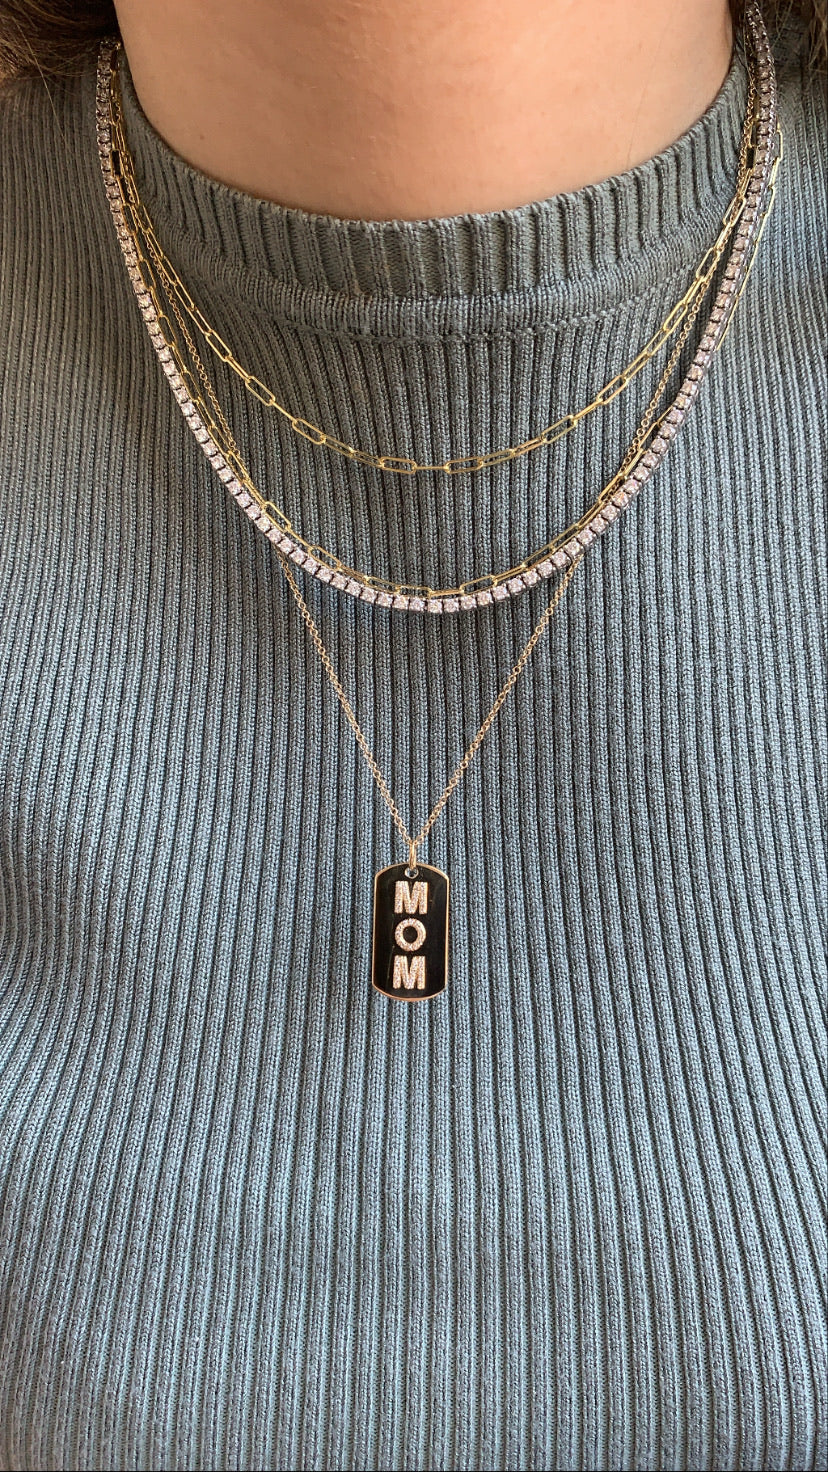 Mom Dog Tag Necklace